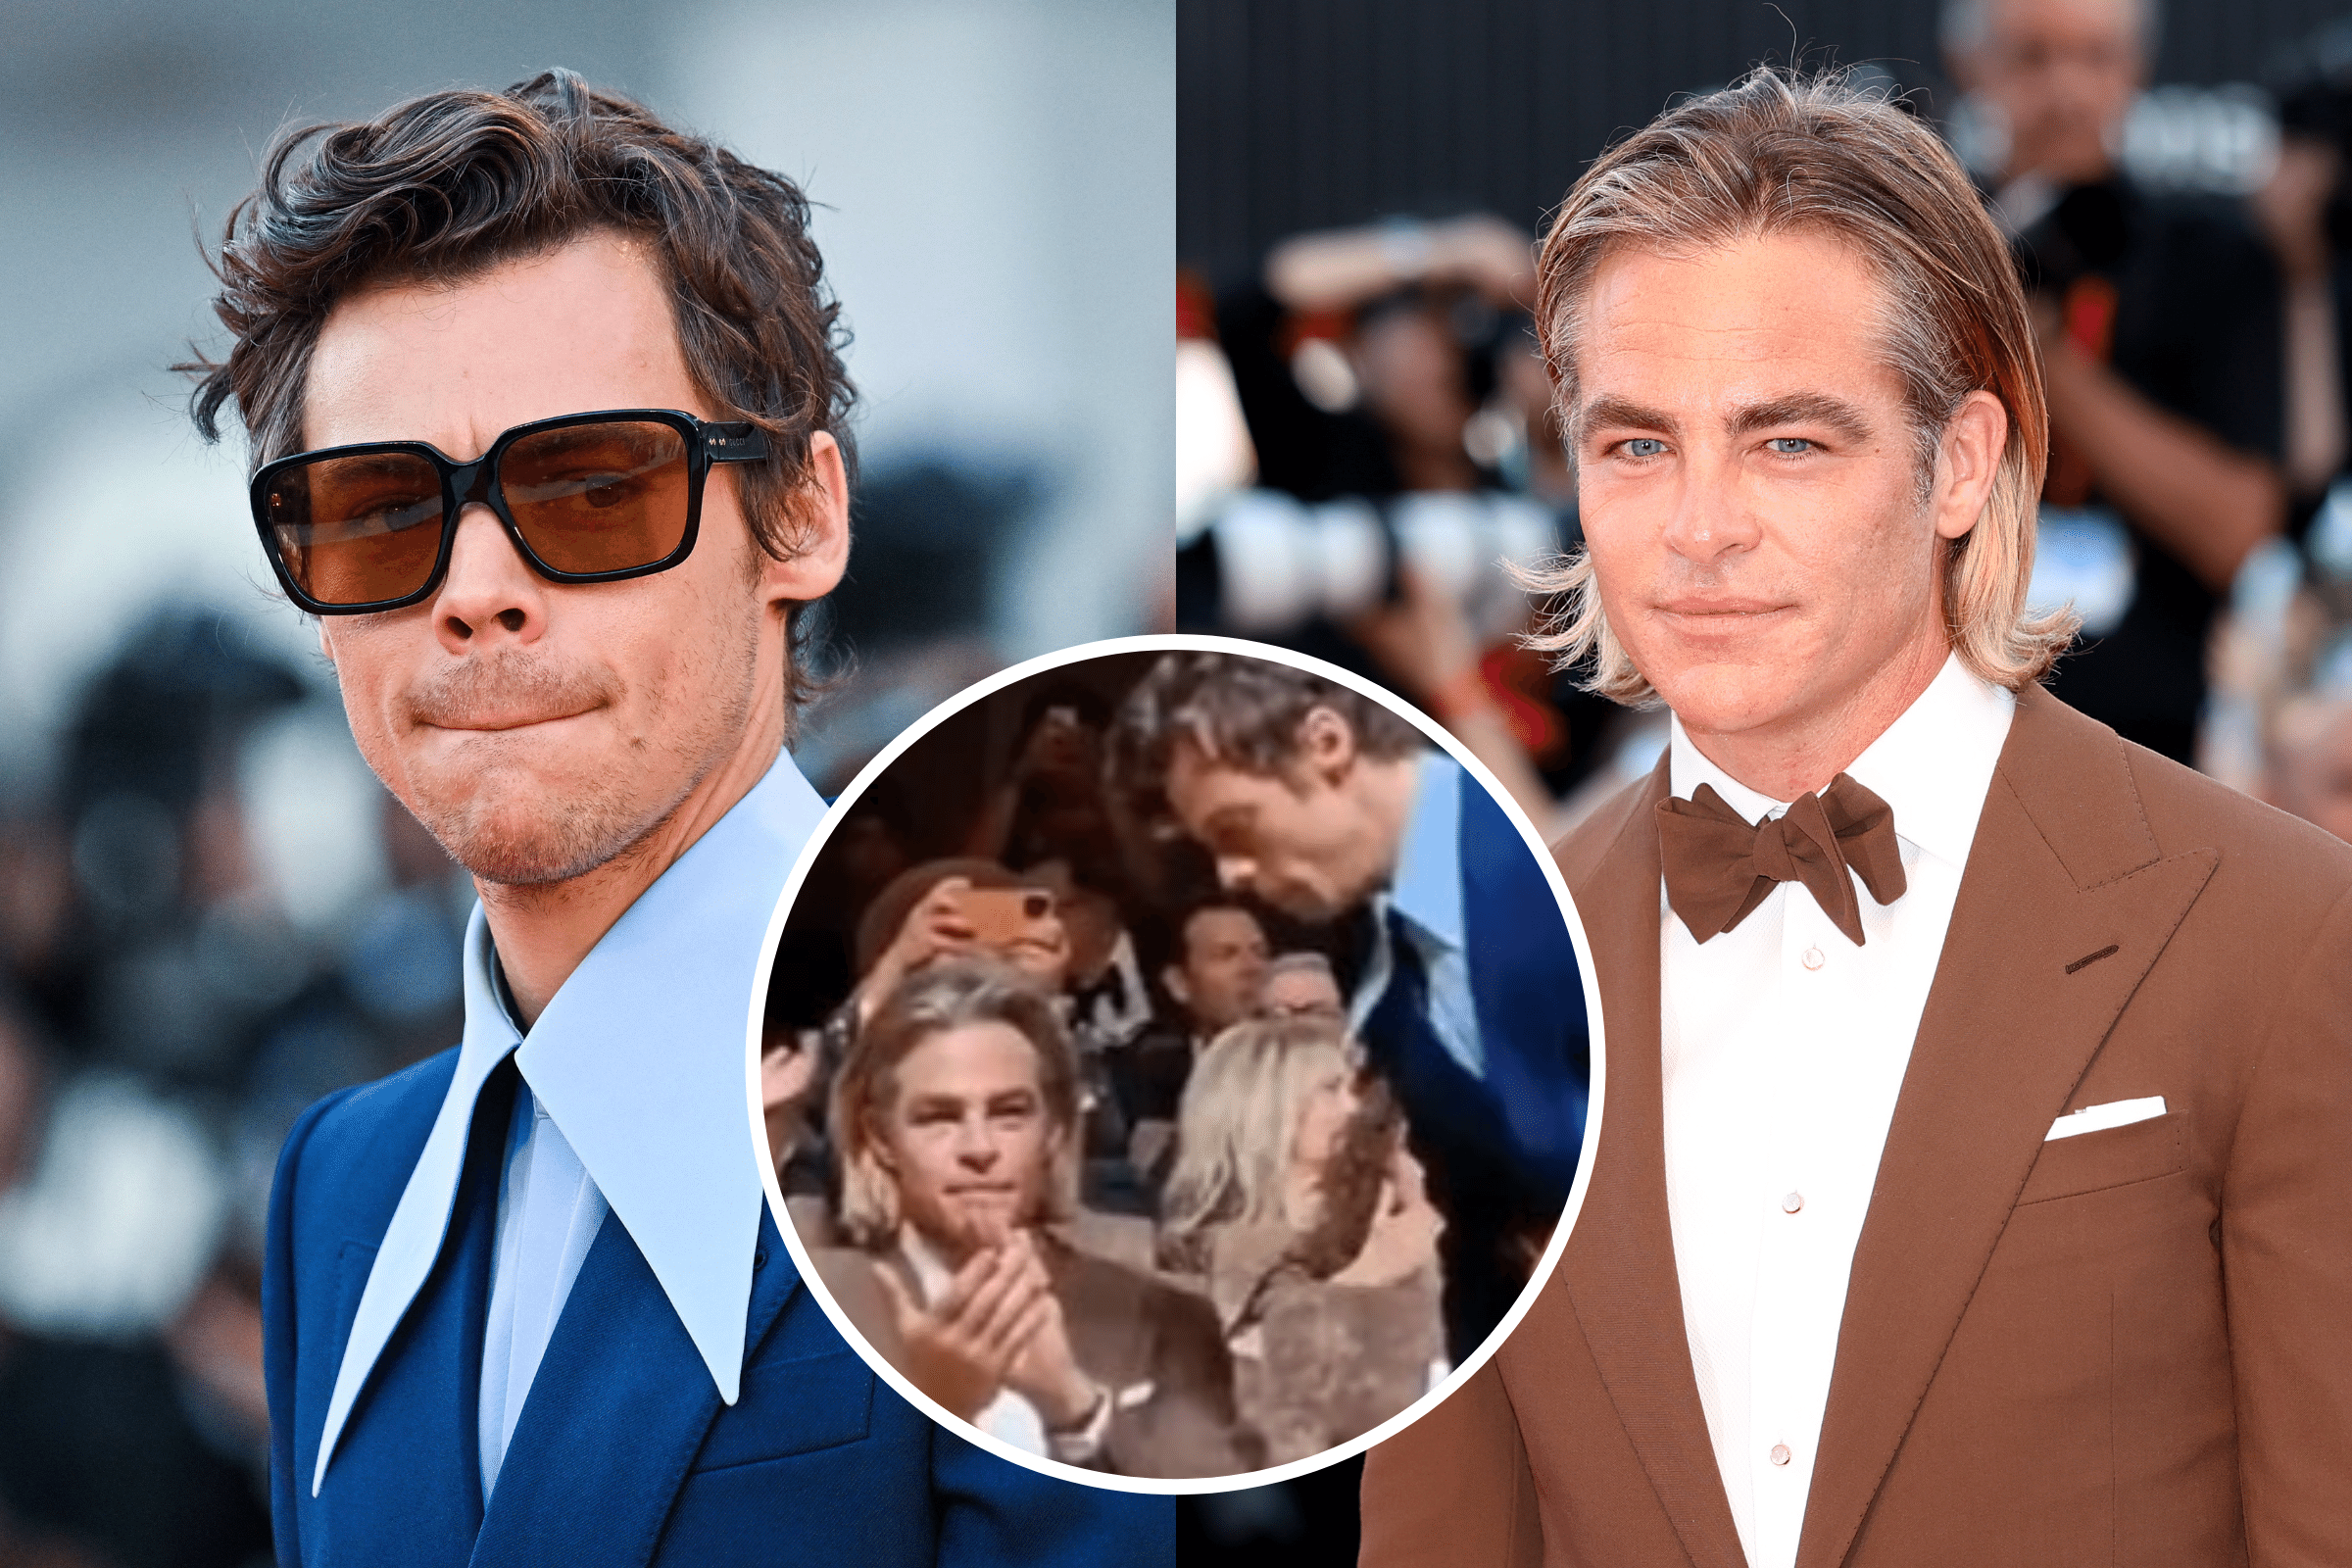 Injection to add Circumference Did Harry Styles 'Spit' on Chris Pine? 'Don't Worry Darling' Cast Drama